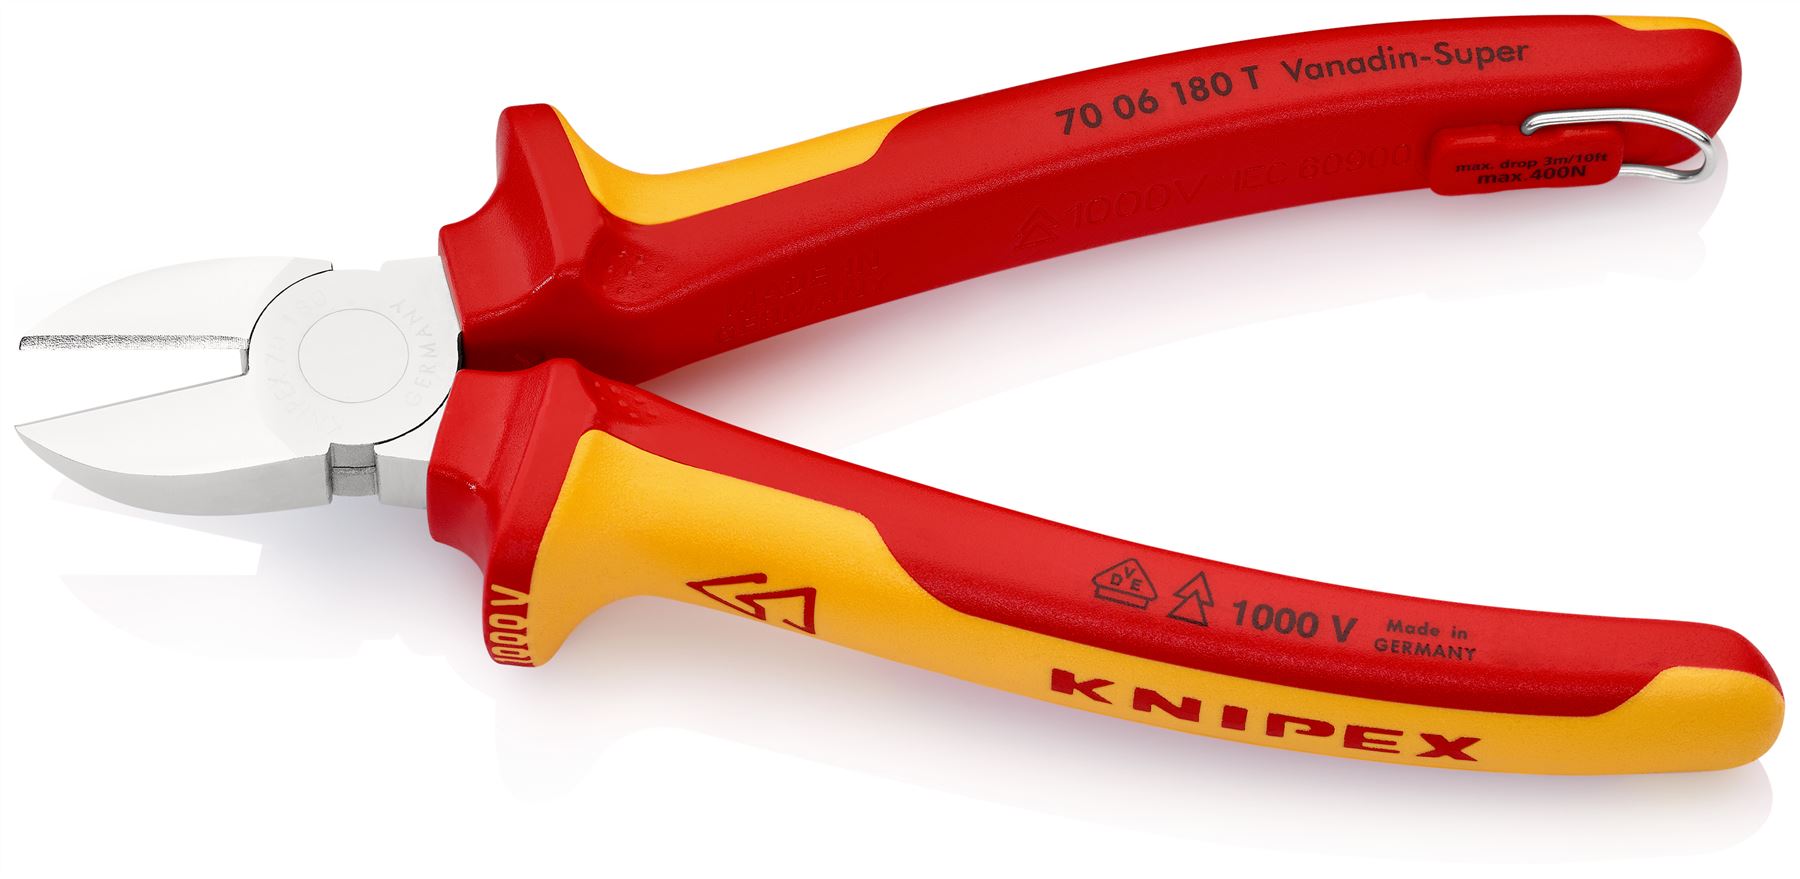 Knipex Diagonal Cutter Side Cutting Pliers 180mm Chrome VDE Insulated 1000V with Tether Point 70 06 180 T